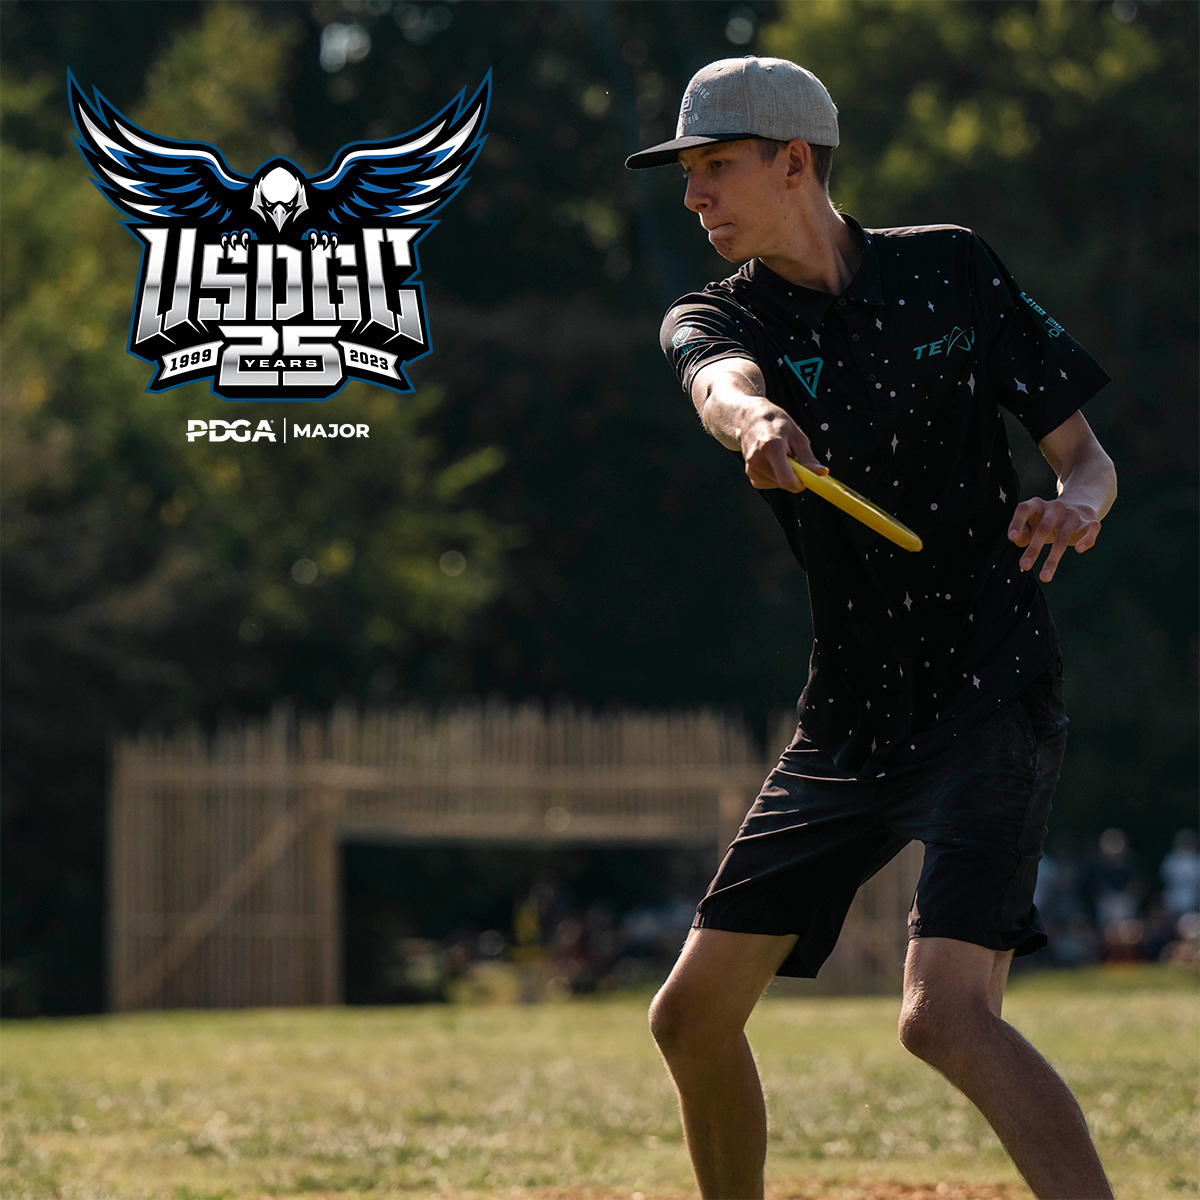 Y'all ready for the last PDGA Major of 2023? Schedule, spectator tickets & more info on the 2023 United States Disc Golf Championship at USDGC.com! #PDGAMajor #USDGC